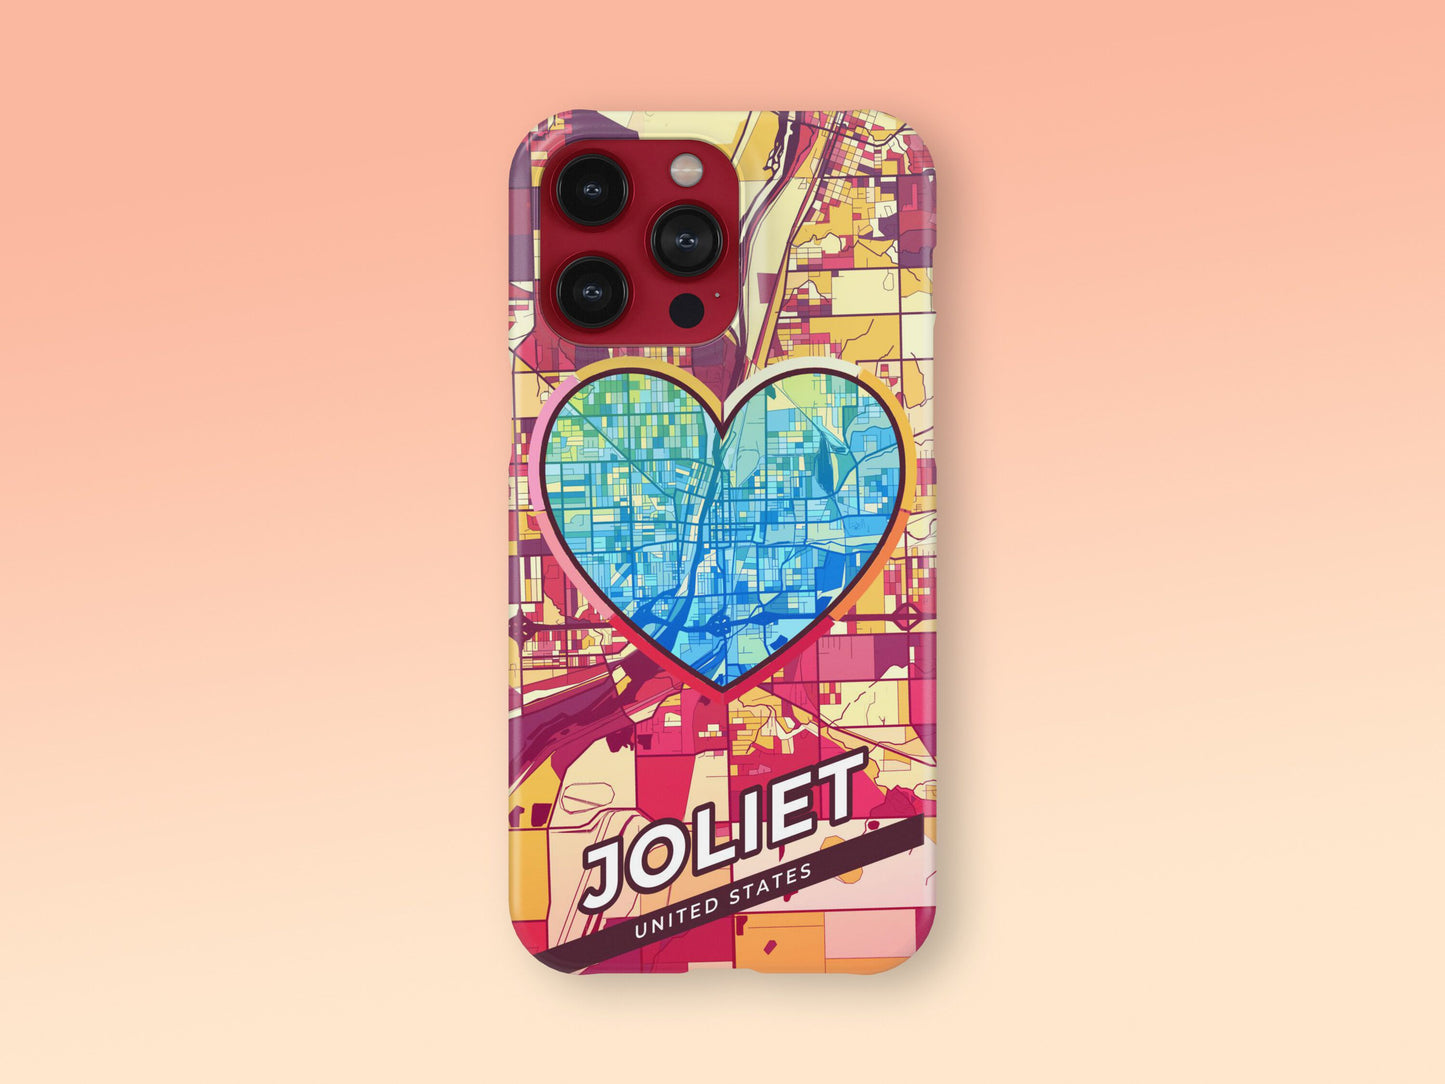 Joliet Illinois slim phone case with colorful icon. Birthday, wedding or housewarming gift. Couple match cases. 2